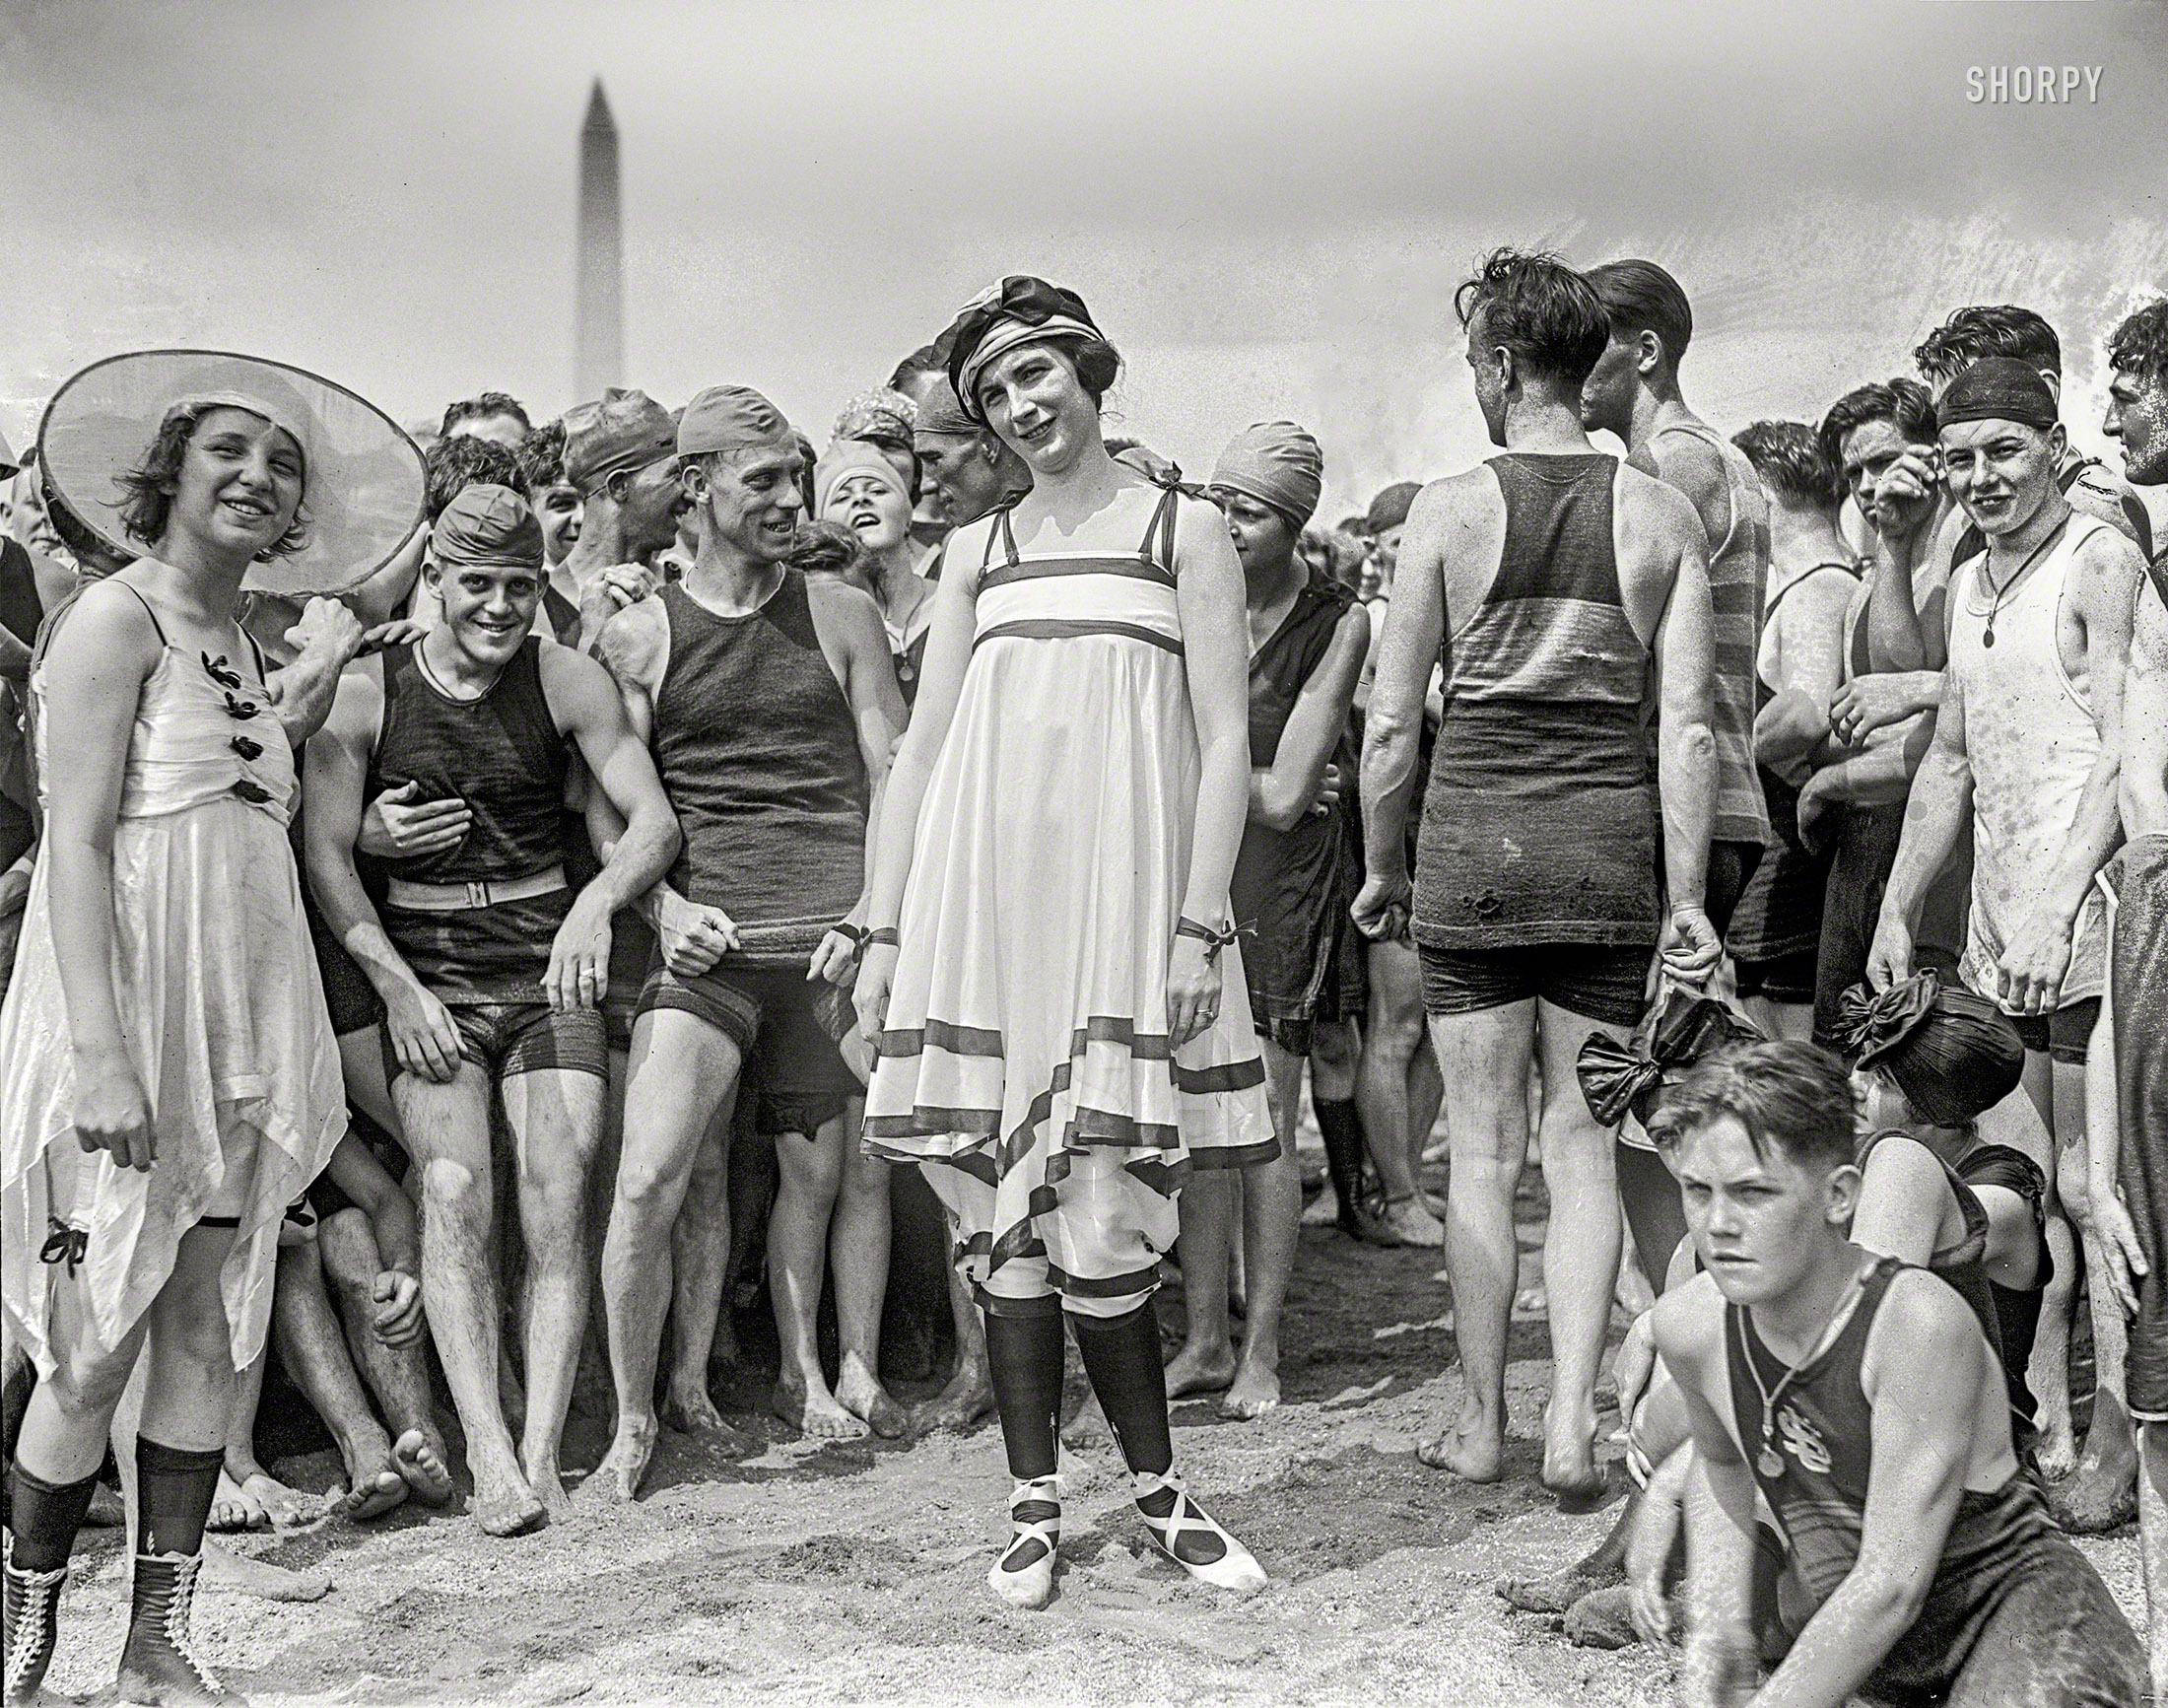 July 26, 1919. Washington, D.C. "Bathing beach parade at Tidal Basin." National Photo Company Collection glass negative. View full size.

GALAXY OF BEAUTY PARADES AT BEACH

Comely Damsels in Scant Attire Win Prizes for Their Appearance.

&nbsp; &nbsp; &nbsp; &nbsp; JULY 27 -- While more than 5,000 persons clambered to each other's shoulders and to roofs of nearby buildings to view the Annette Kellermanns at the first annual beach parade at the Tidal Basin yesterday afternoon, Mrs. Audrey O'Connor, 620 Maryland avenue southwest, was proclaimed by the judges as Washington's most beautiful girl in a bathing suit. Mrs. O'Connor wore a blue and orange jumper, blue cap and orange tights. Miss Dot Buckley, 1250 Tenth street northwest, received honorable mention in the contest. Her suit was a creation in red, white and blue.
&nbsp; &nbsp; &nbsp; &nbsp; First prize in the costume contest was awarded Mrs. Grace Fleishman, 5 Iowa circle, who wore a white silk suit with black and white border and a white silk hat. Miss Muriel Gibbs, costumed as Miss Liberty in stars and stripes, received honorable mention. Silver loving cups were awarded to the winners of both the beauty and the costume contests. 
&nbsp; &nbsp; &nbsp; &nbsp; Following the parade of the score or more of beauties between cheering crowds of bathing beach fans, the former faced half a dozen movie machines and a battery of press cameras. Later one of the winners obligingly did a modified "shimmy dance" for the movie men.